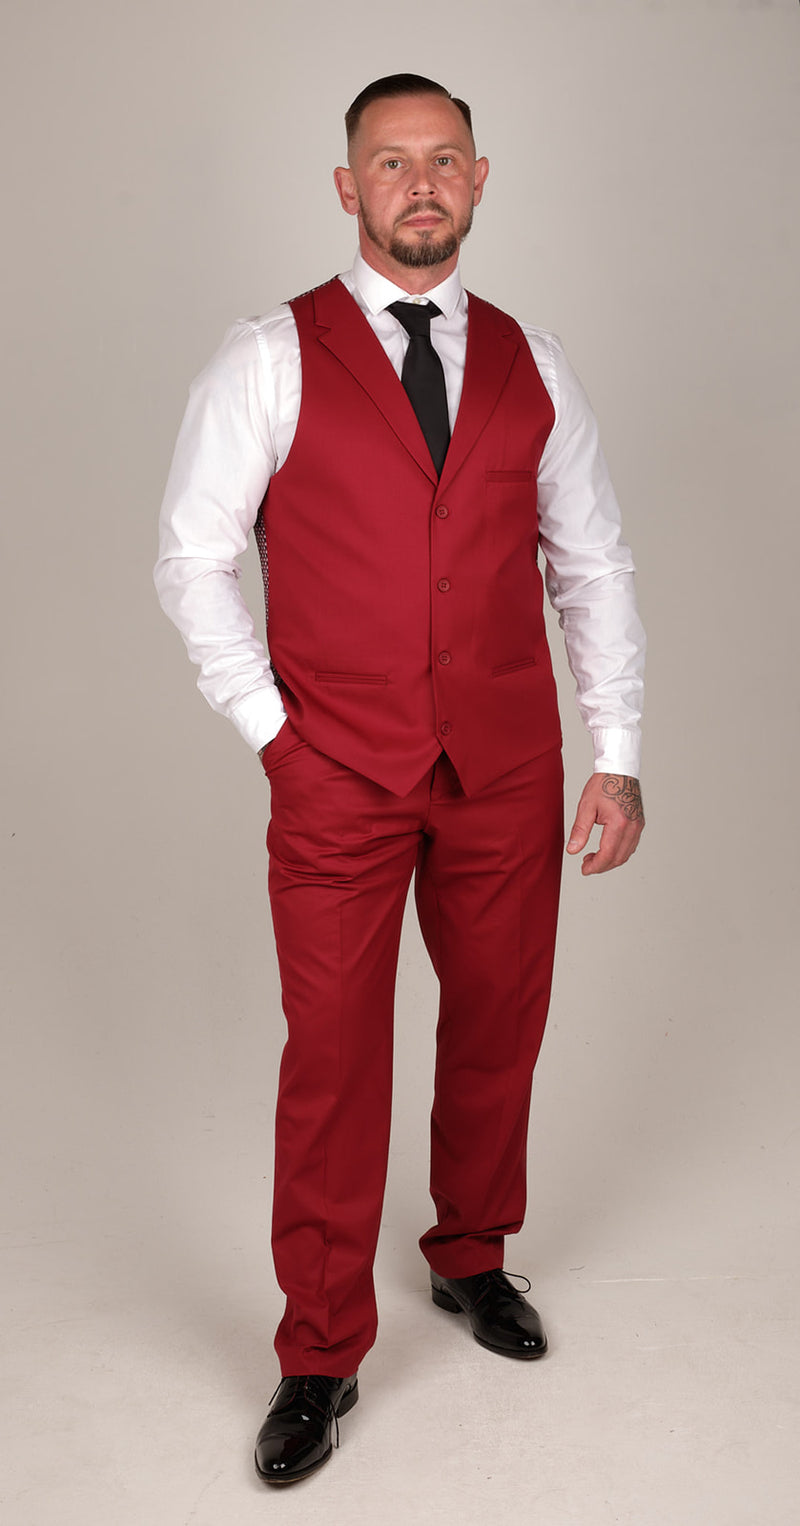 • Mens 3 Piece Smart Formal Occasional Suit Finished in Classic Wine Burgundy Colour • This Suit Comes Complete With Waistcoat, Trousers & Blazer Jacket! • Perfect Suit To Be Worn For Any Smart Formal Occasion Such As Weddings, Proms, Parties or Work • Made From Light Weight Premium Wool Textured Polyester Fabric, Tailored Fit (in between slim & regular fit), True To Size - Party Wear :- Office Wear